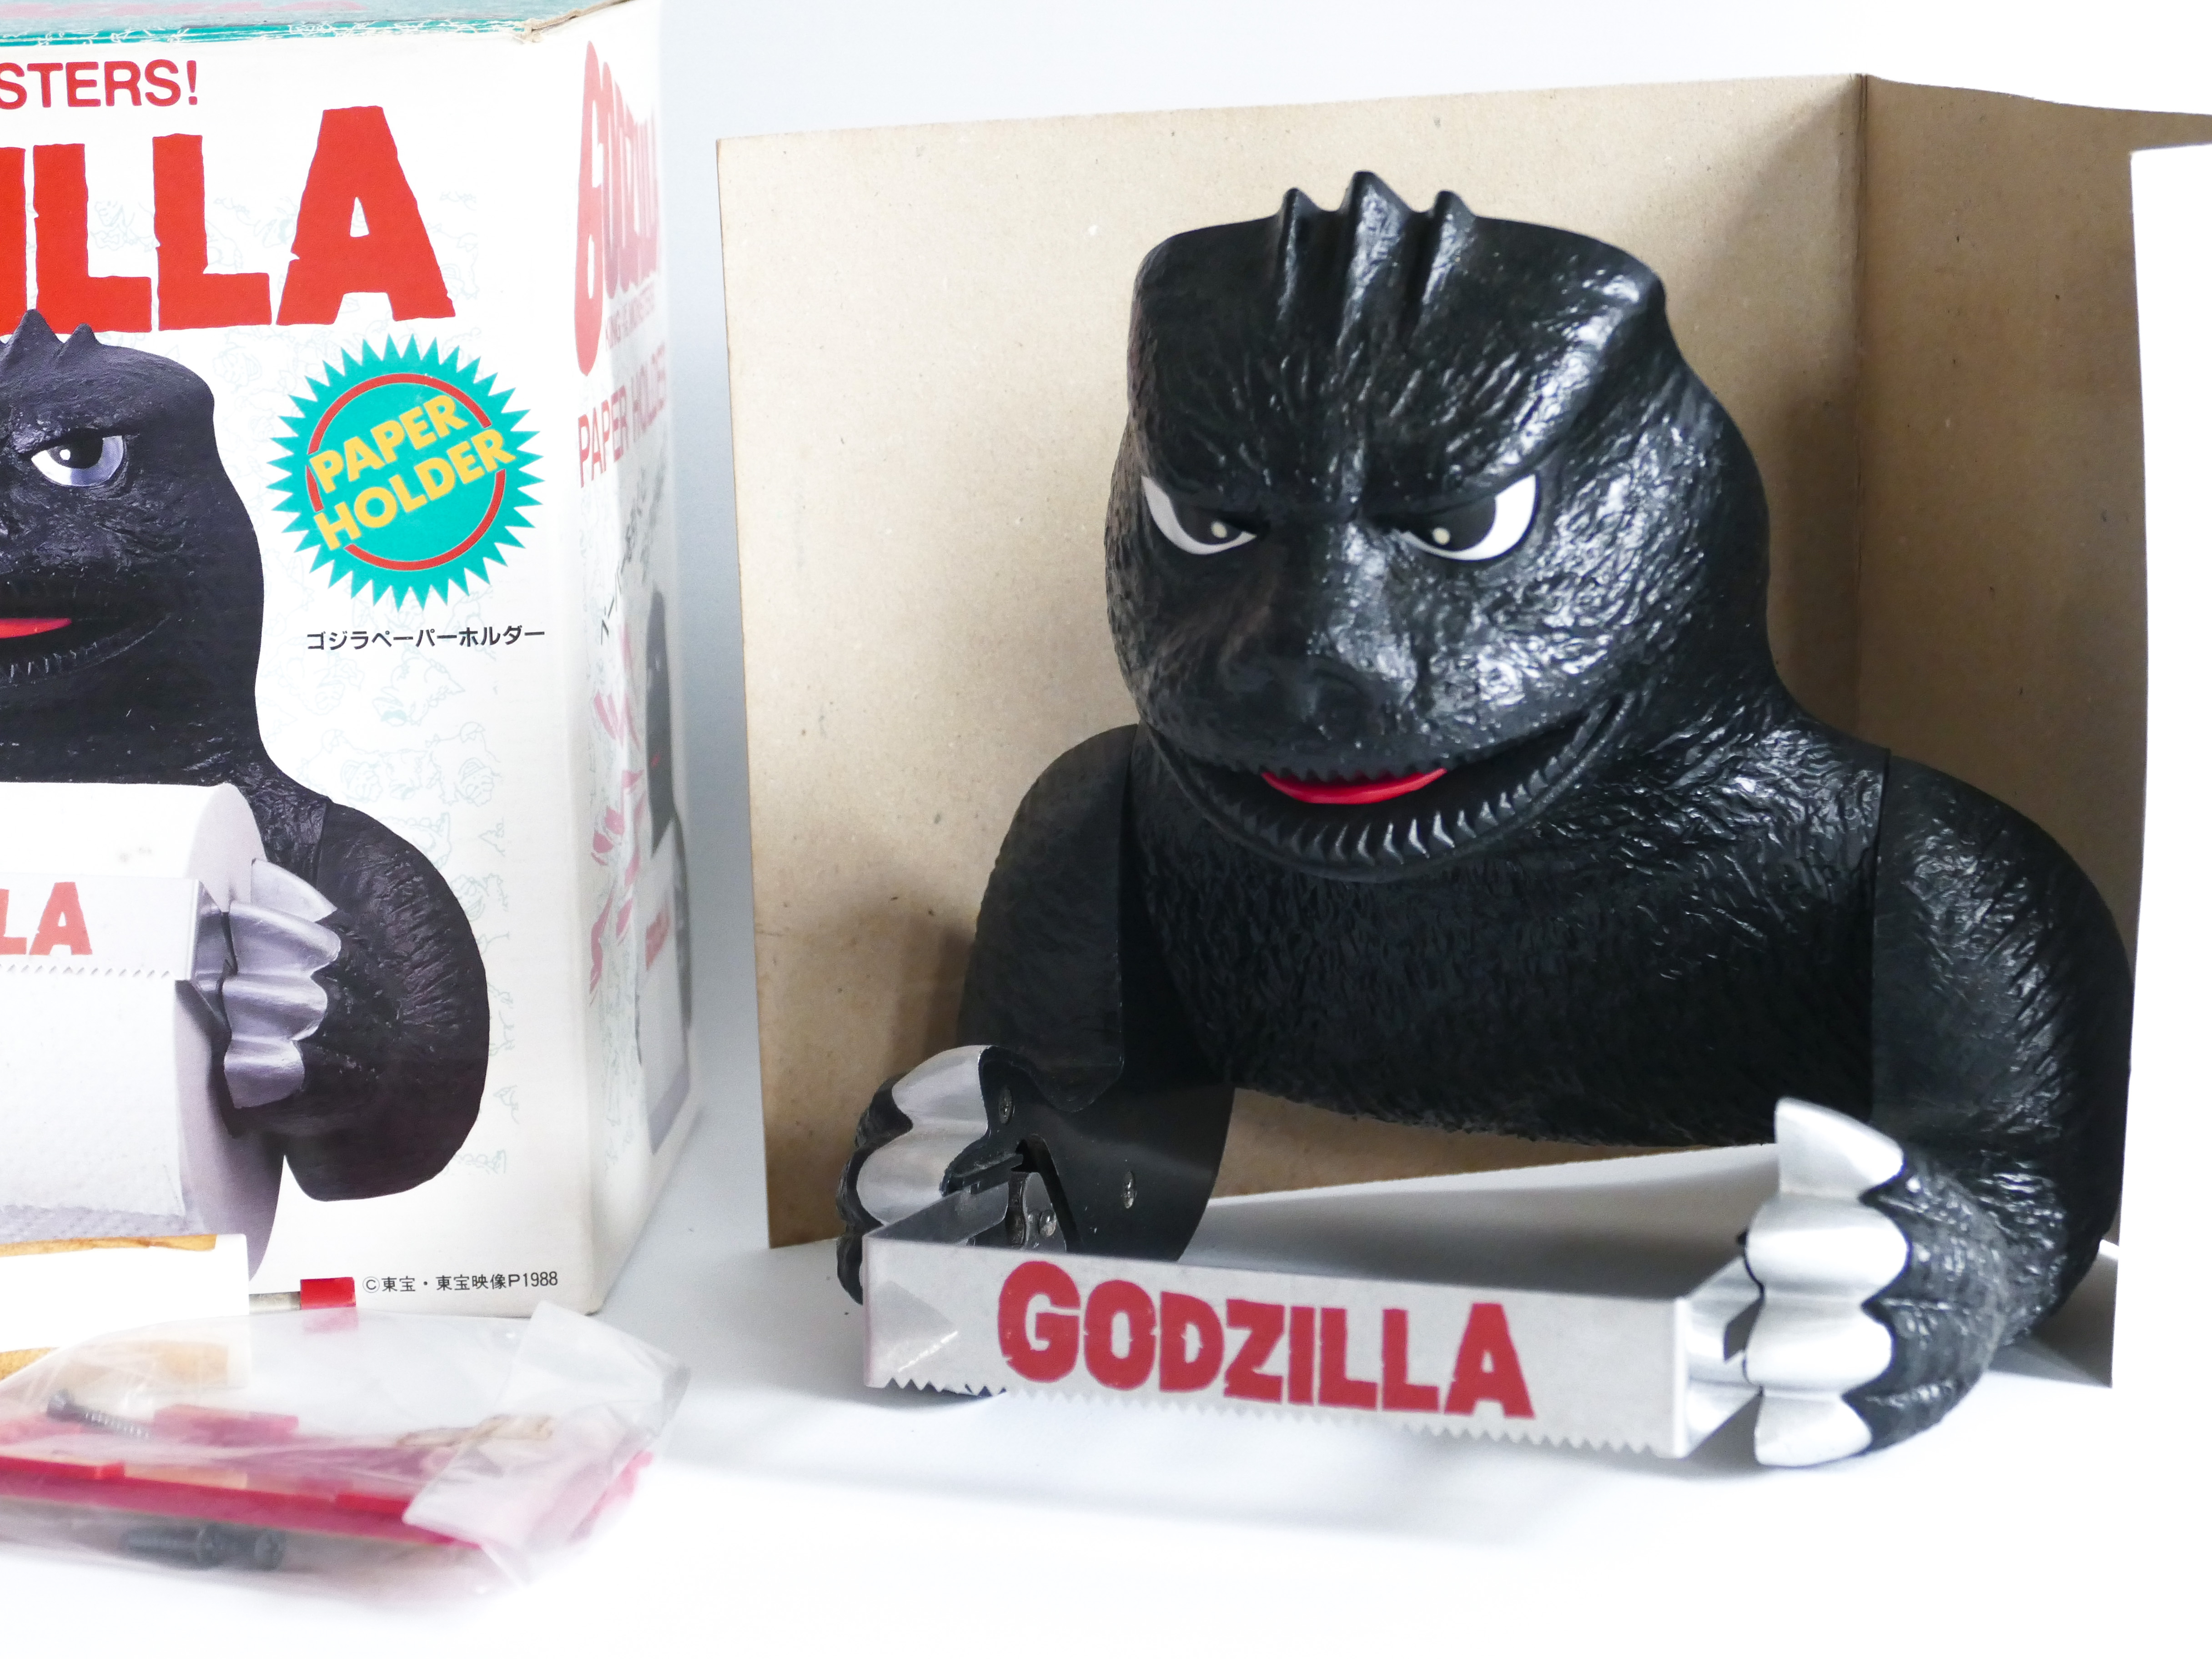 GODZILLA TOILET ROLL HOLDER, BEETLAND JAPAN, 1980's. EVERY HOME SHOULD HAVE ONE! KAIJU MONSTER TOY - Bild 2 aus 2